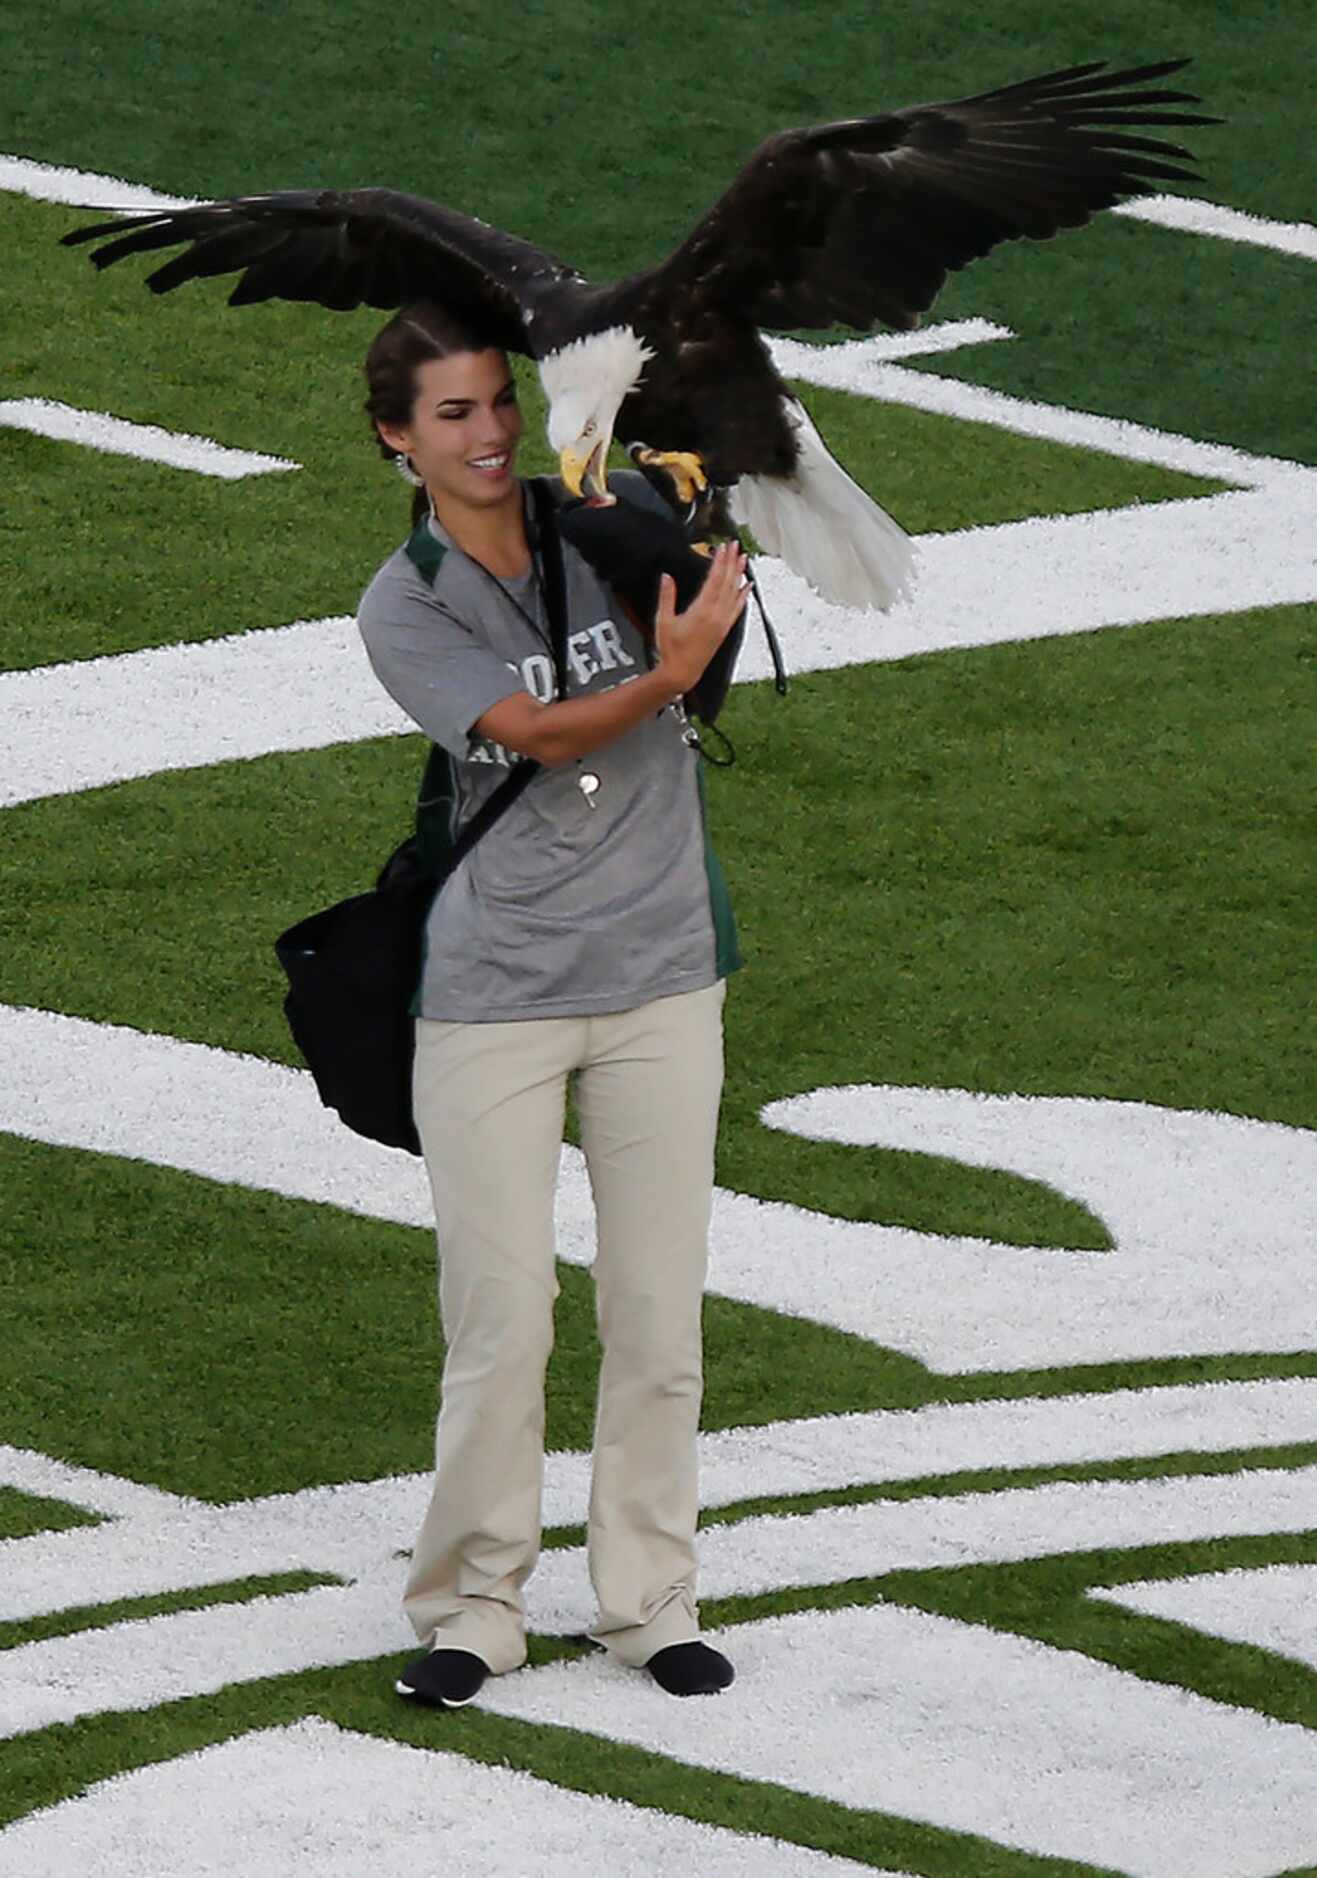 A live eagle made an appearance at midfield just before kickoff as Prosper High School...